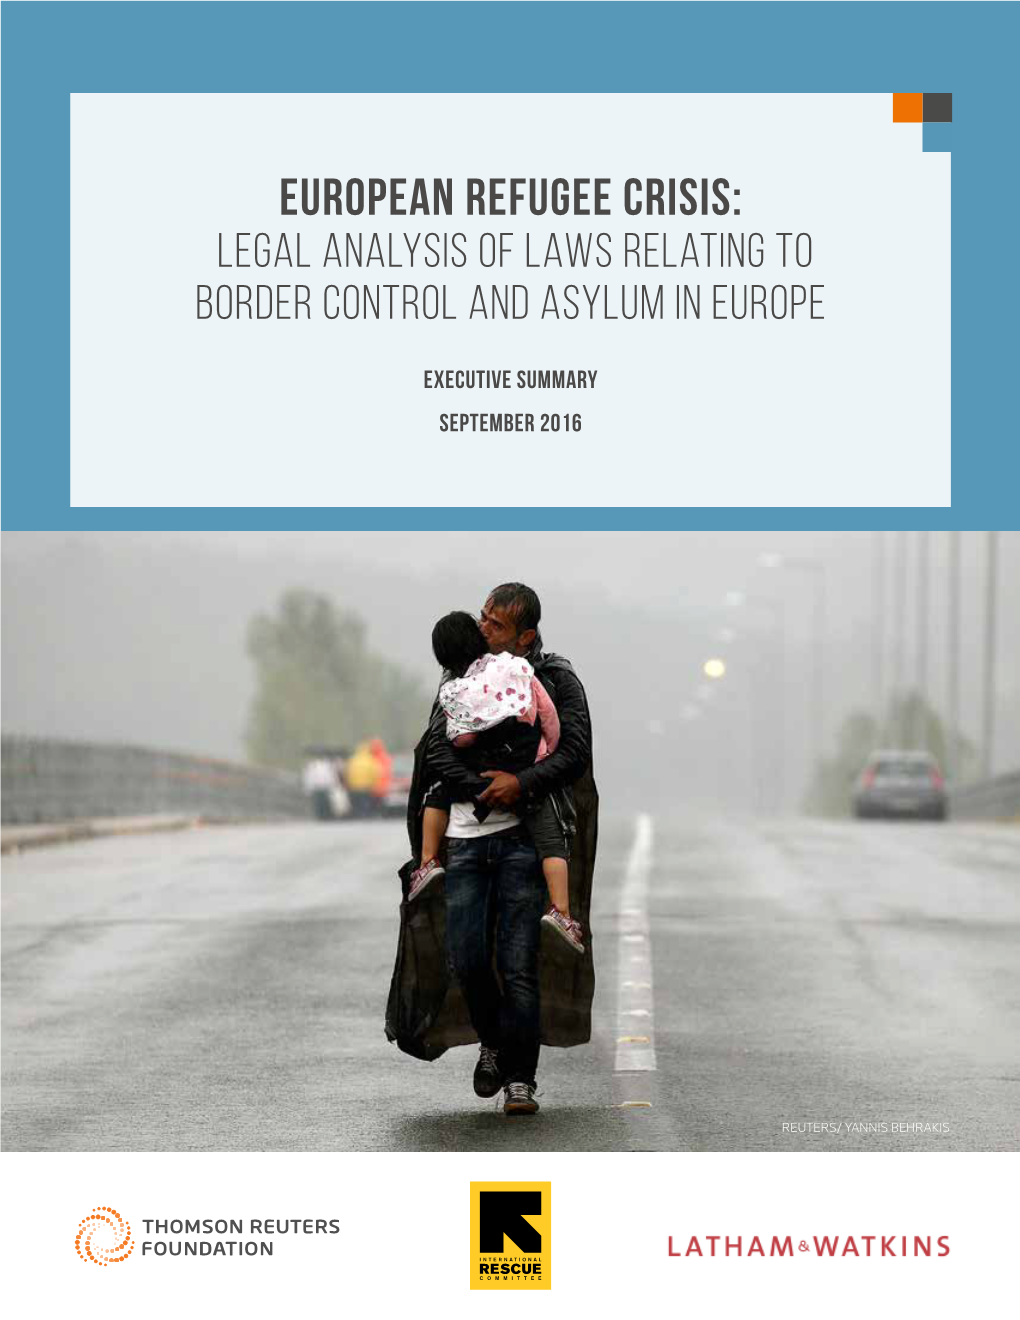 EUROPEAN REFUGEE CRISIS: Legal Analysis of Laws Relating to Border Control and Asylum in Europe